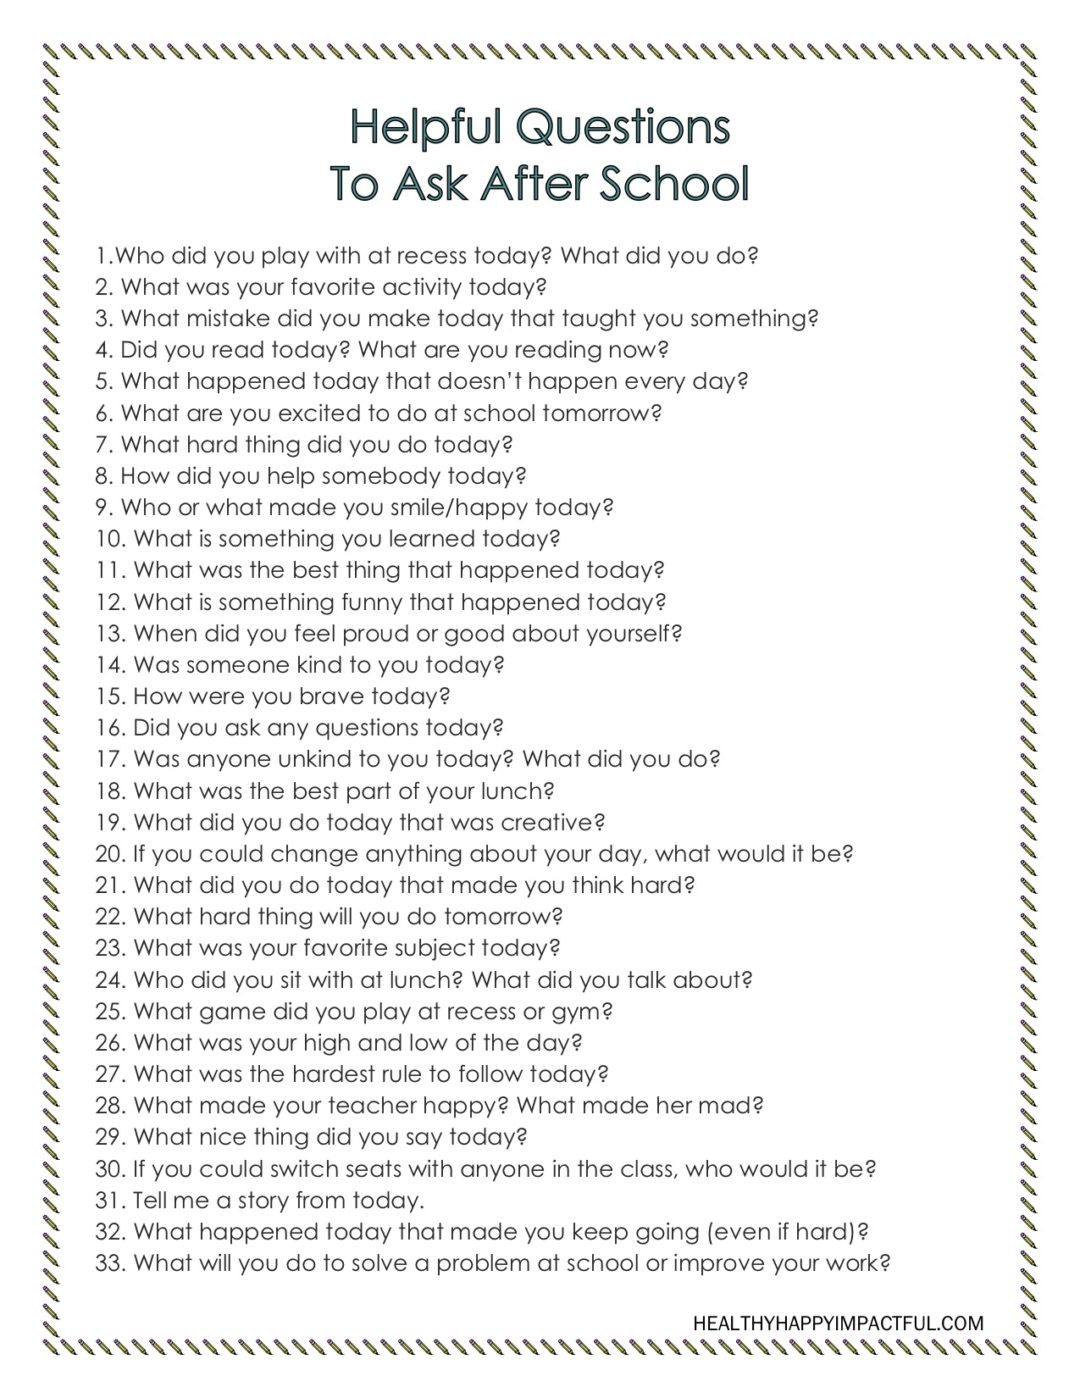 33 Impactful Questions To Ask Your Child After School